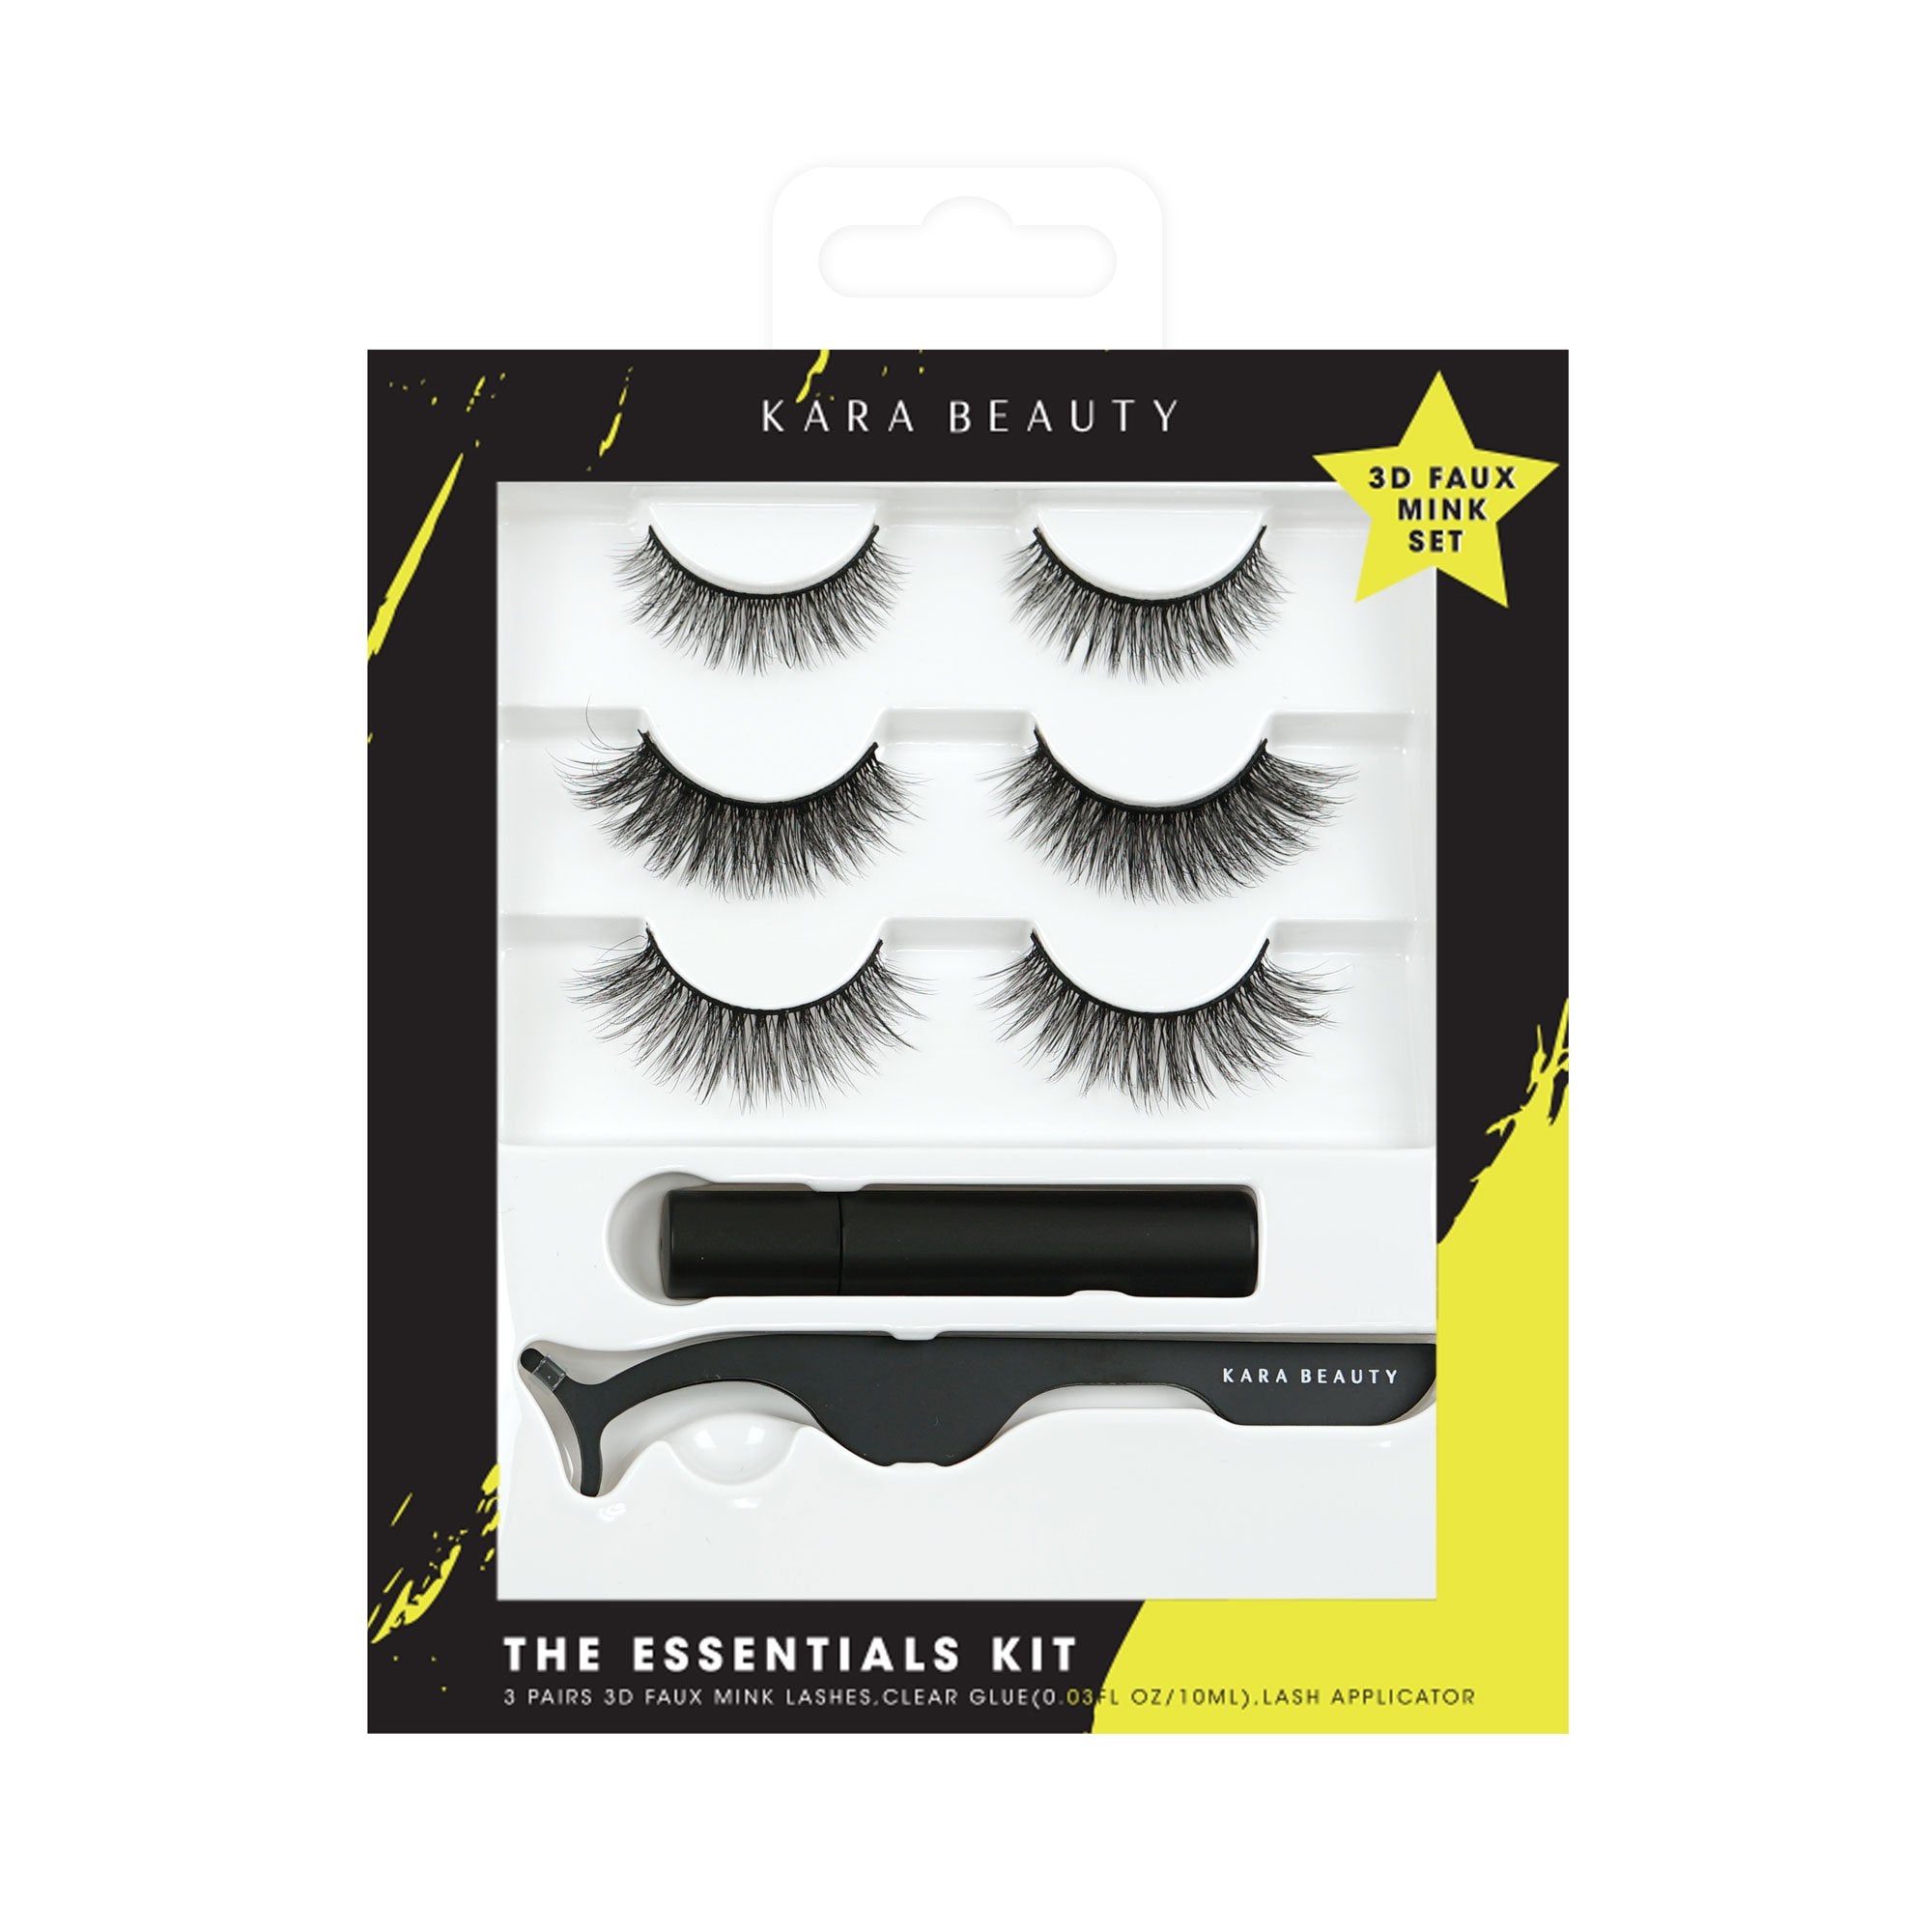 3 pairs of 3D Faux Mink eyelashes PLUS clear glue and lash applicator